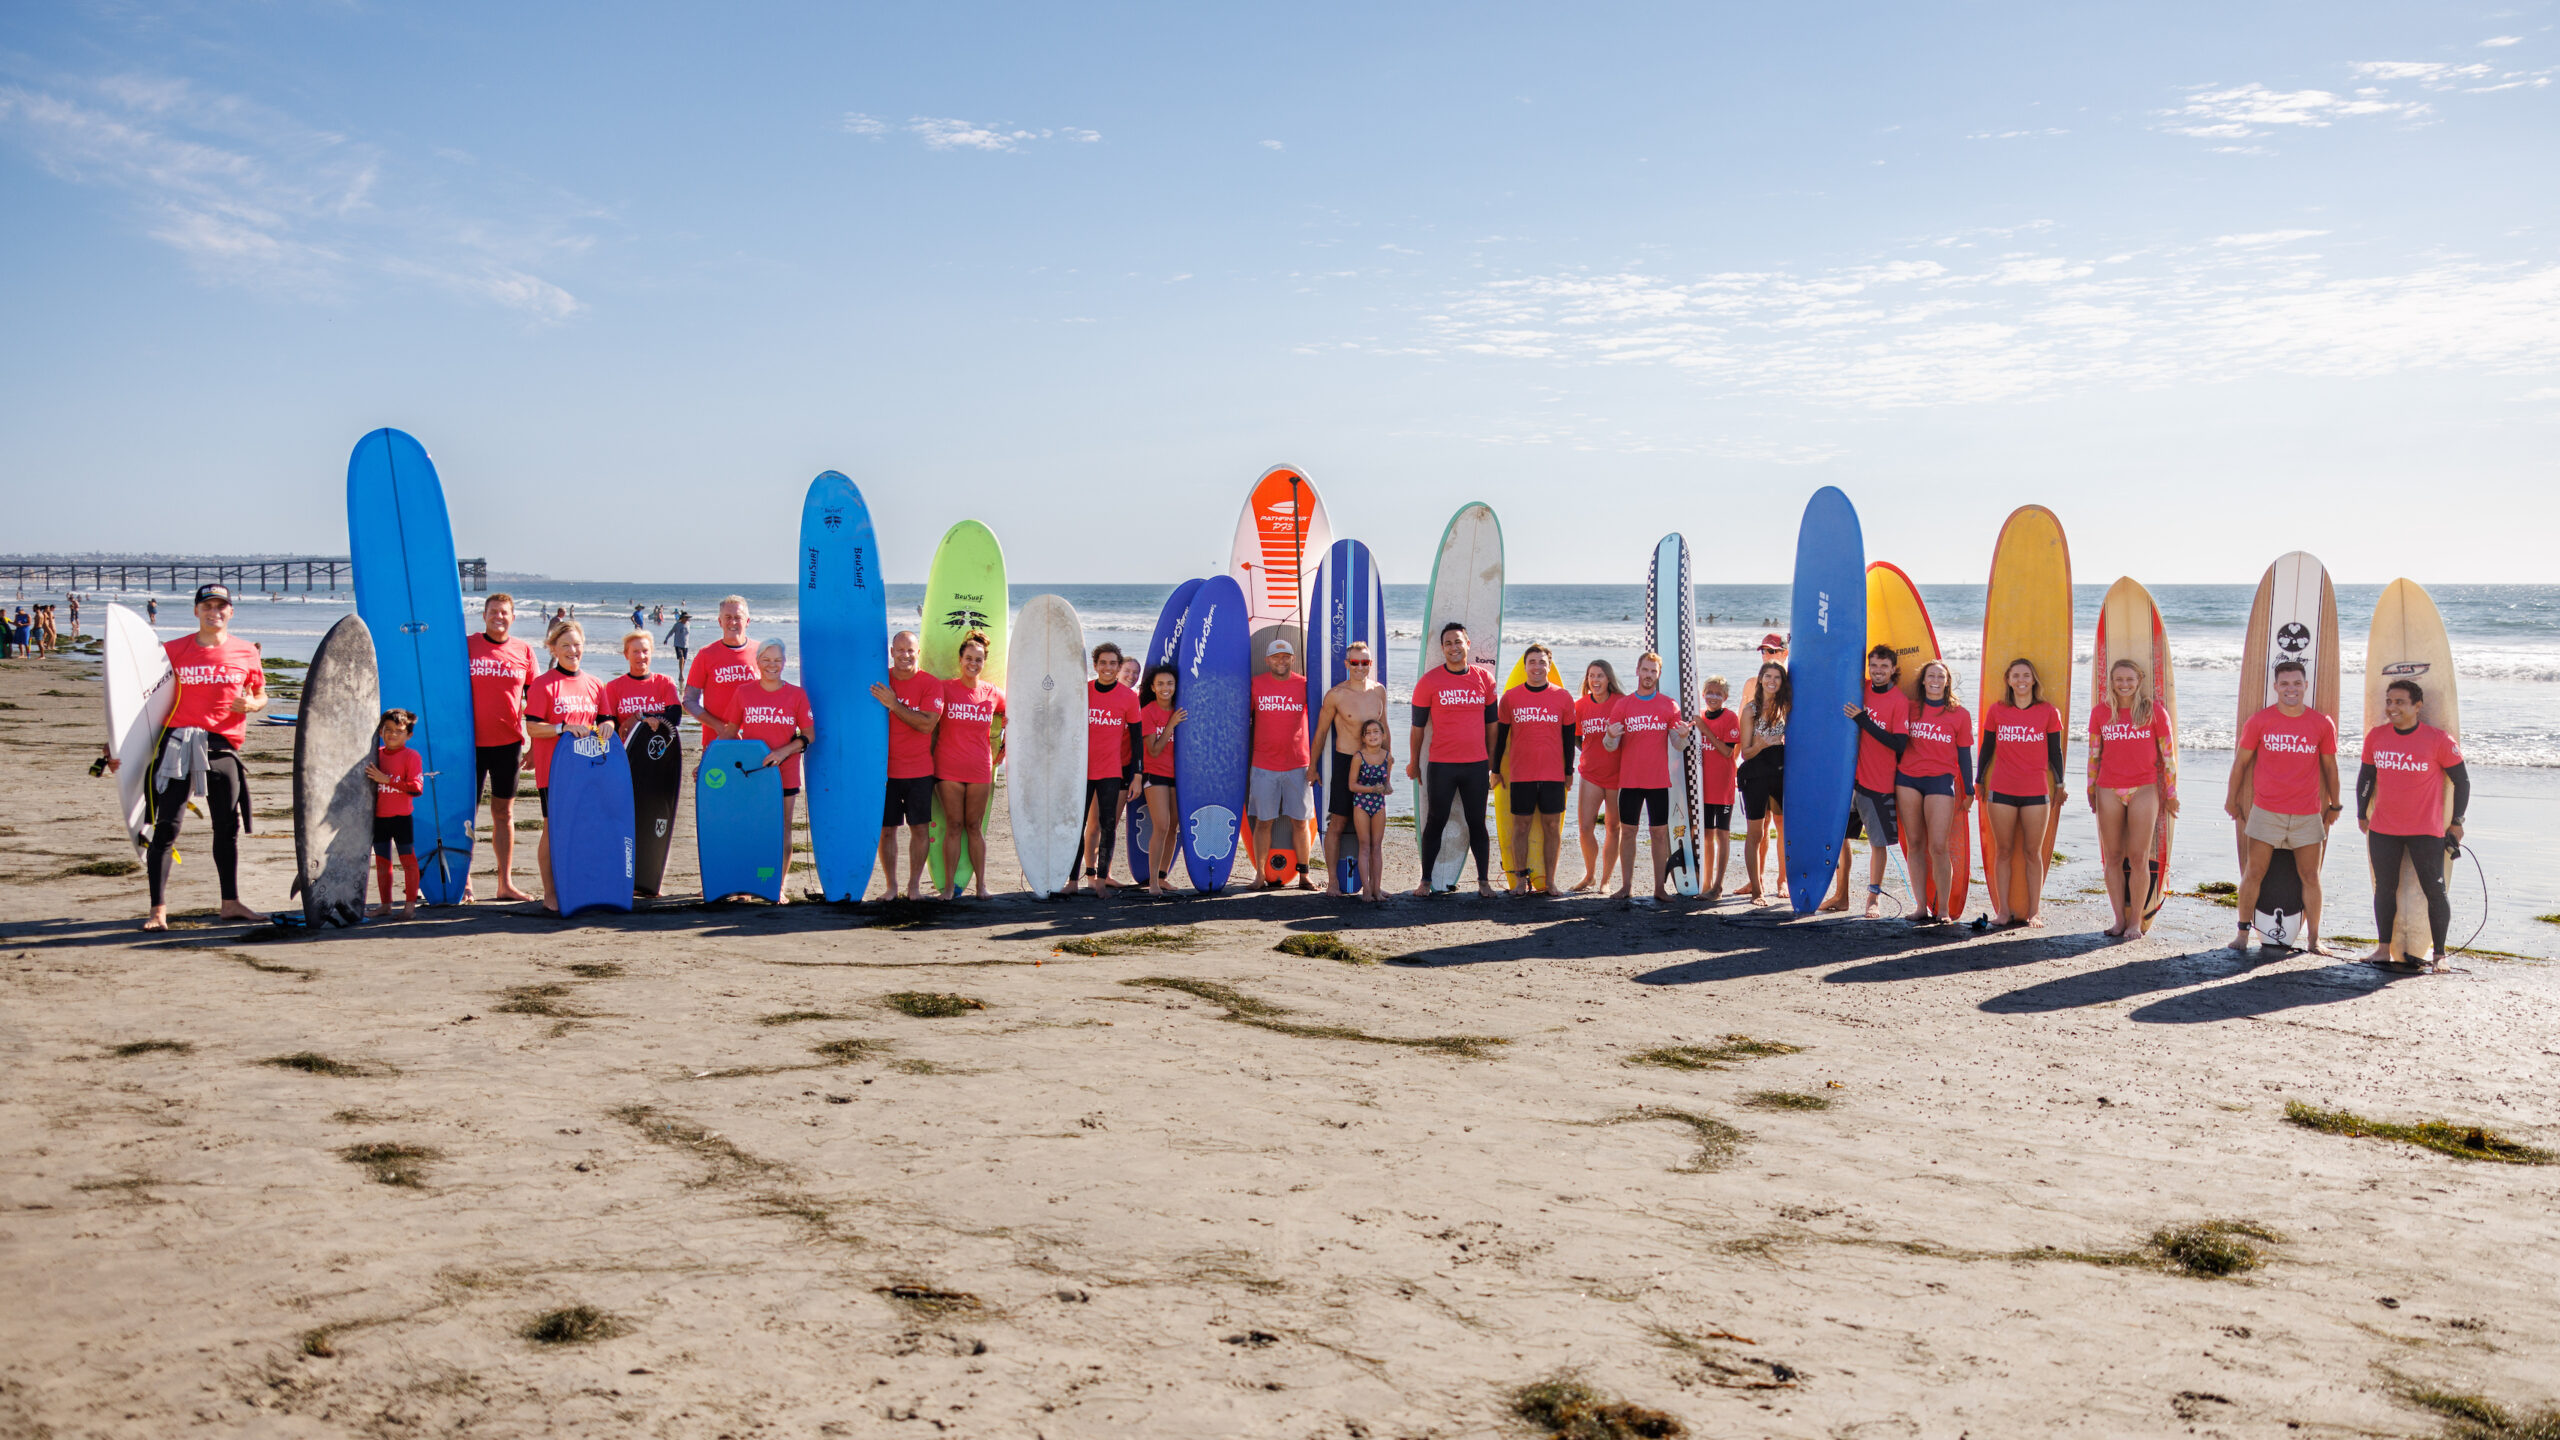 San Diego Charity Unity 4 Orphans volunteers at annual Wave-a-Thon